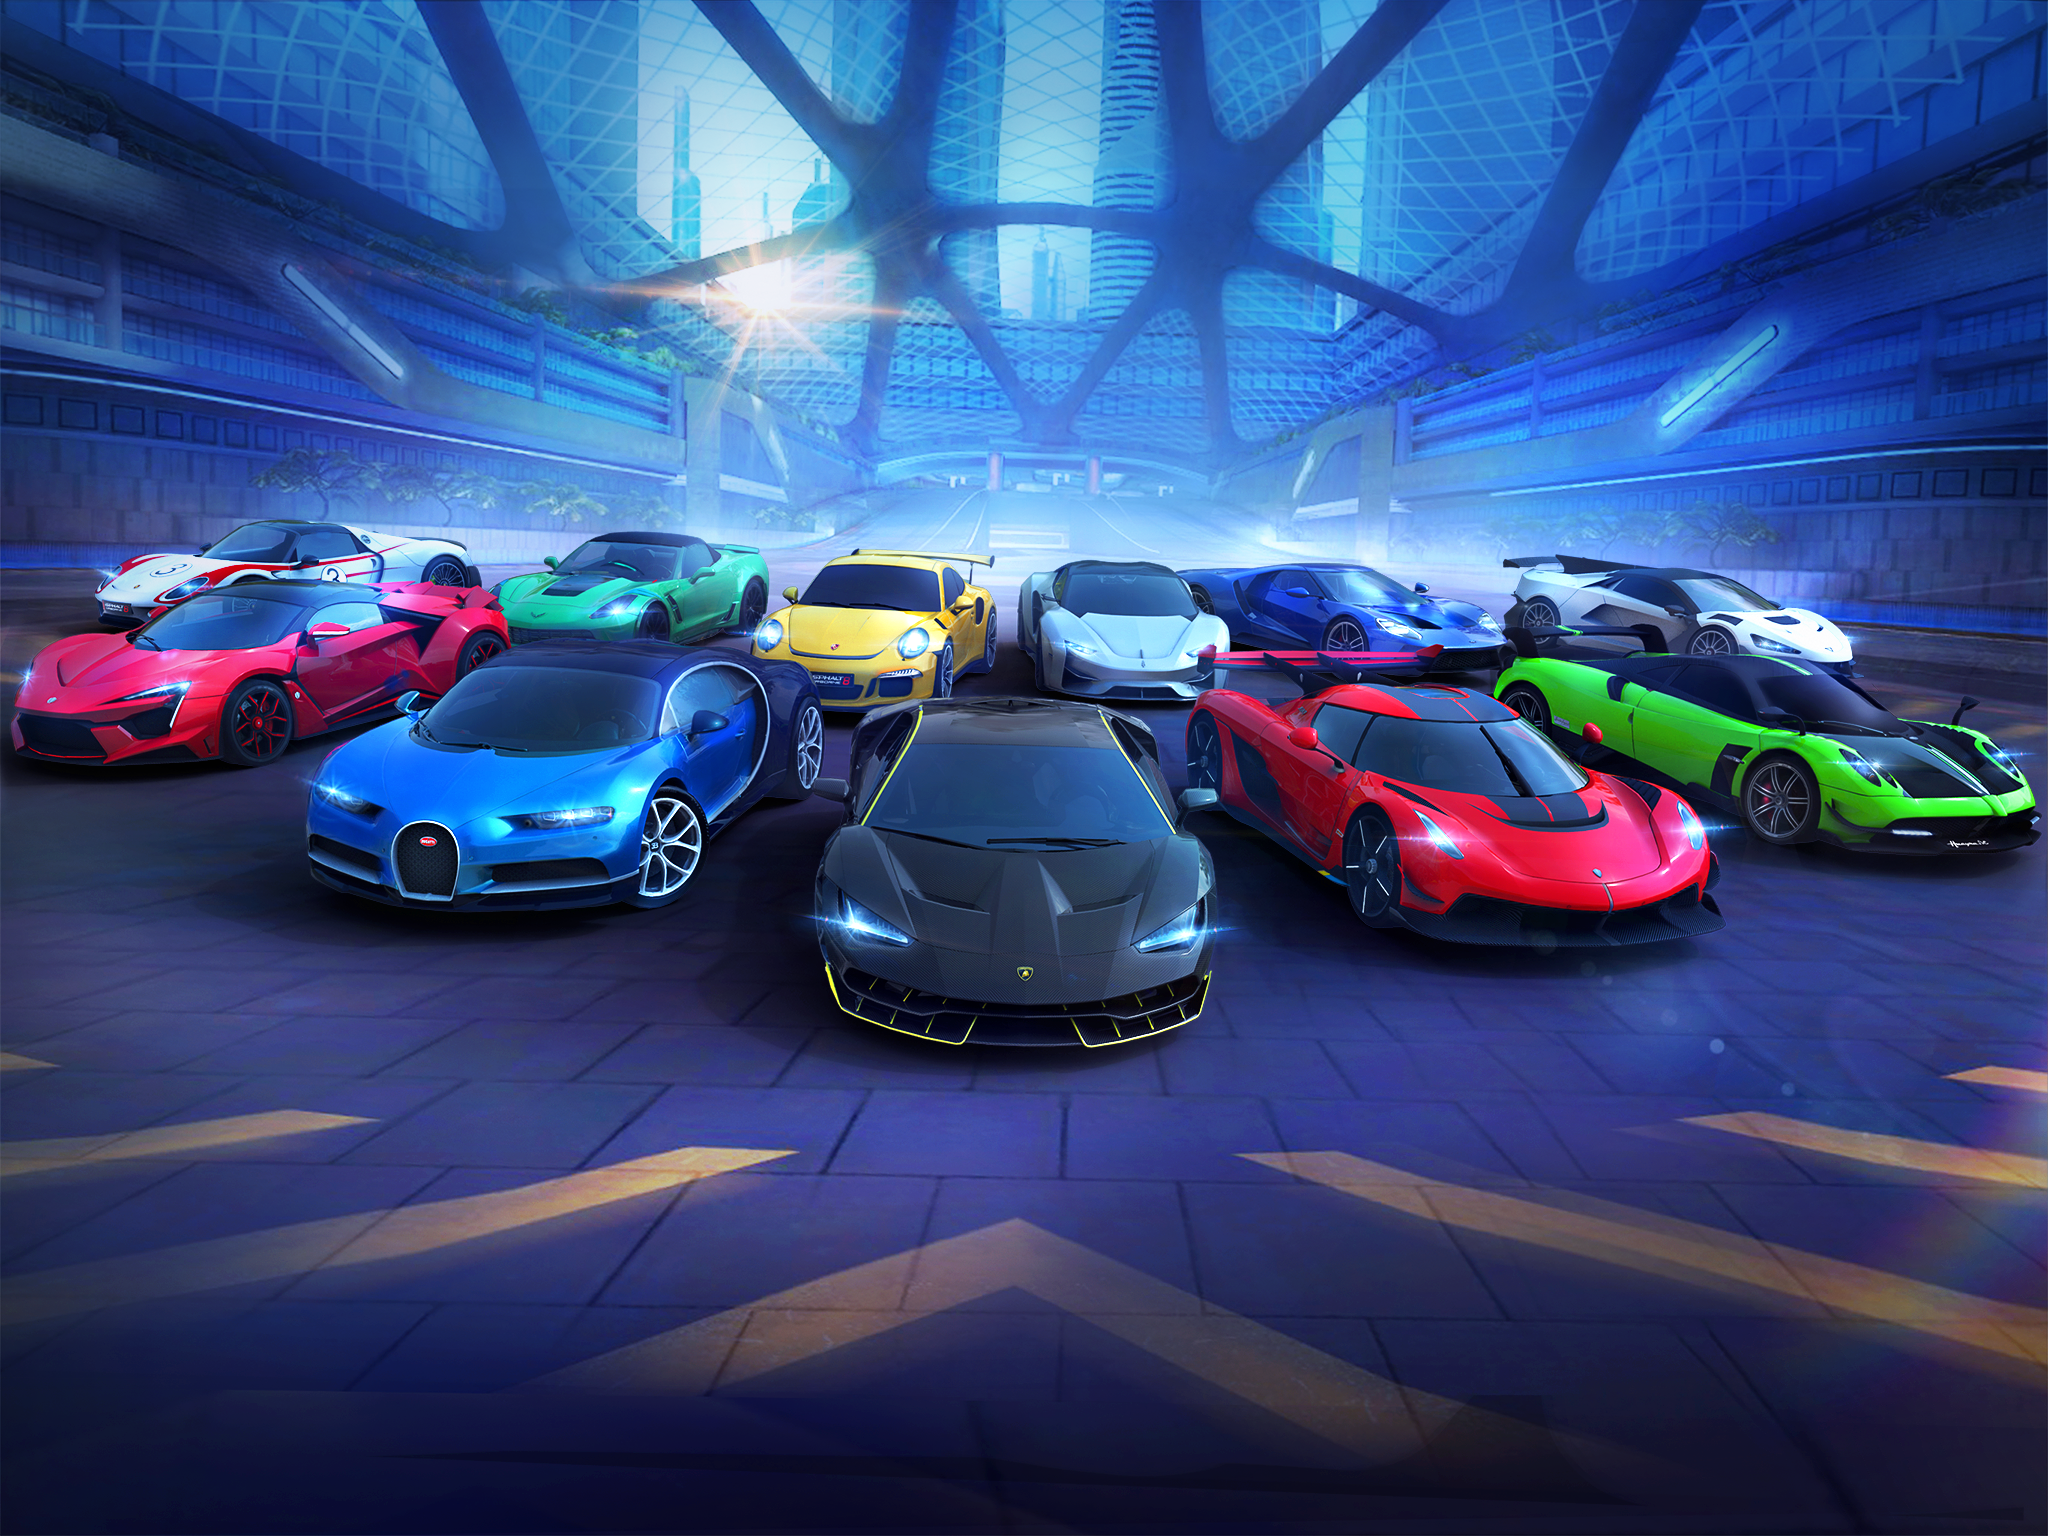 Asphalt 8 Car Racing Game - Drive & Drift::Appstore for Android